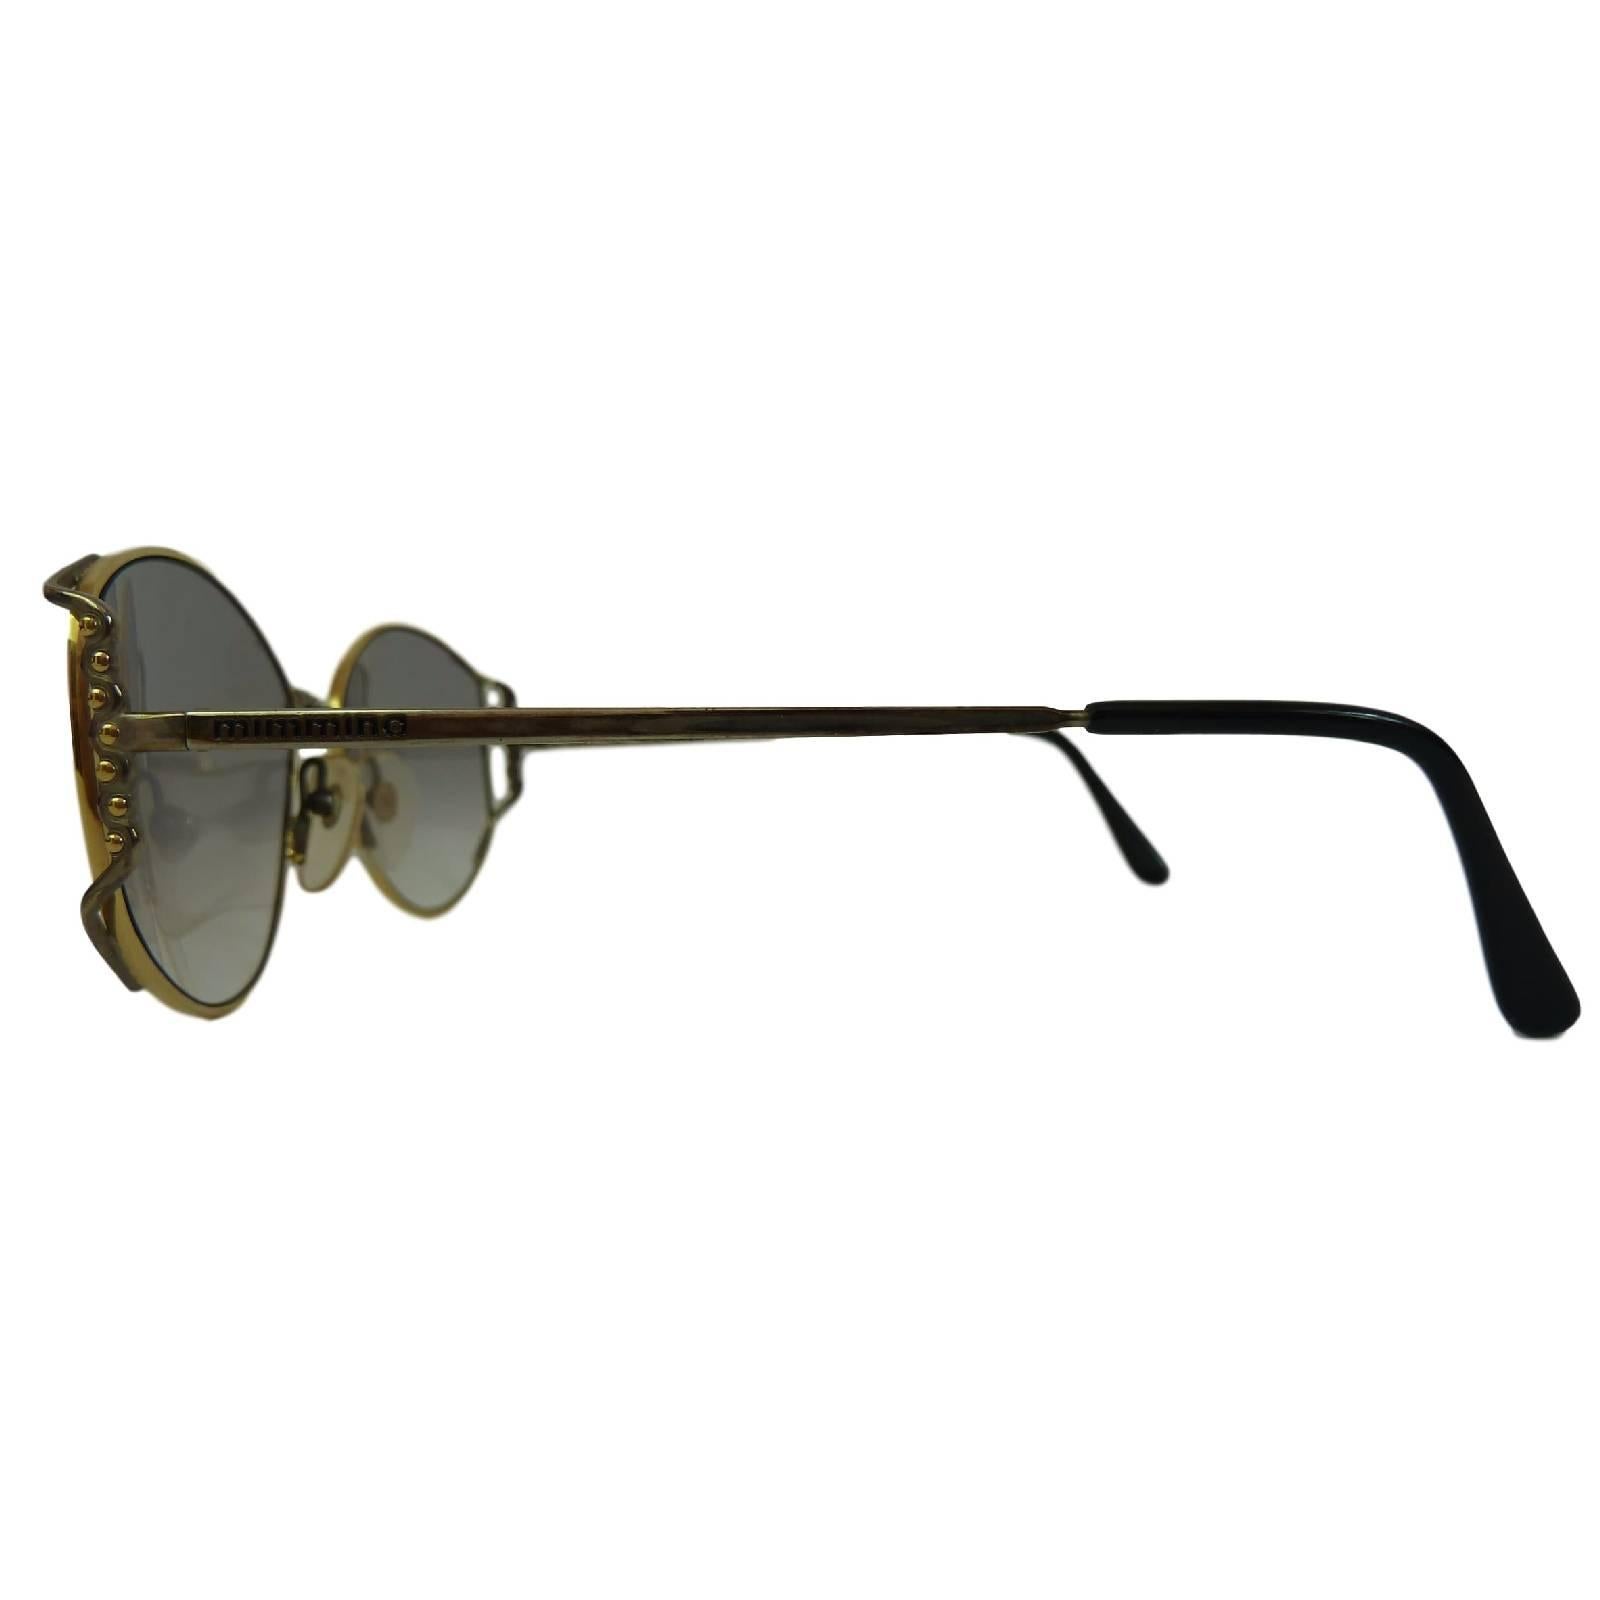 Mimmina R 119 Gold Color Frame Gray Shape Italian Sunglasses, 1980 In New Condition For Sale In Brindisi, IT